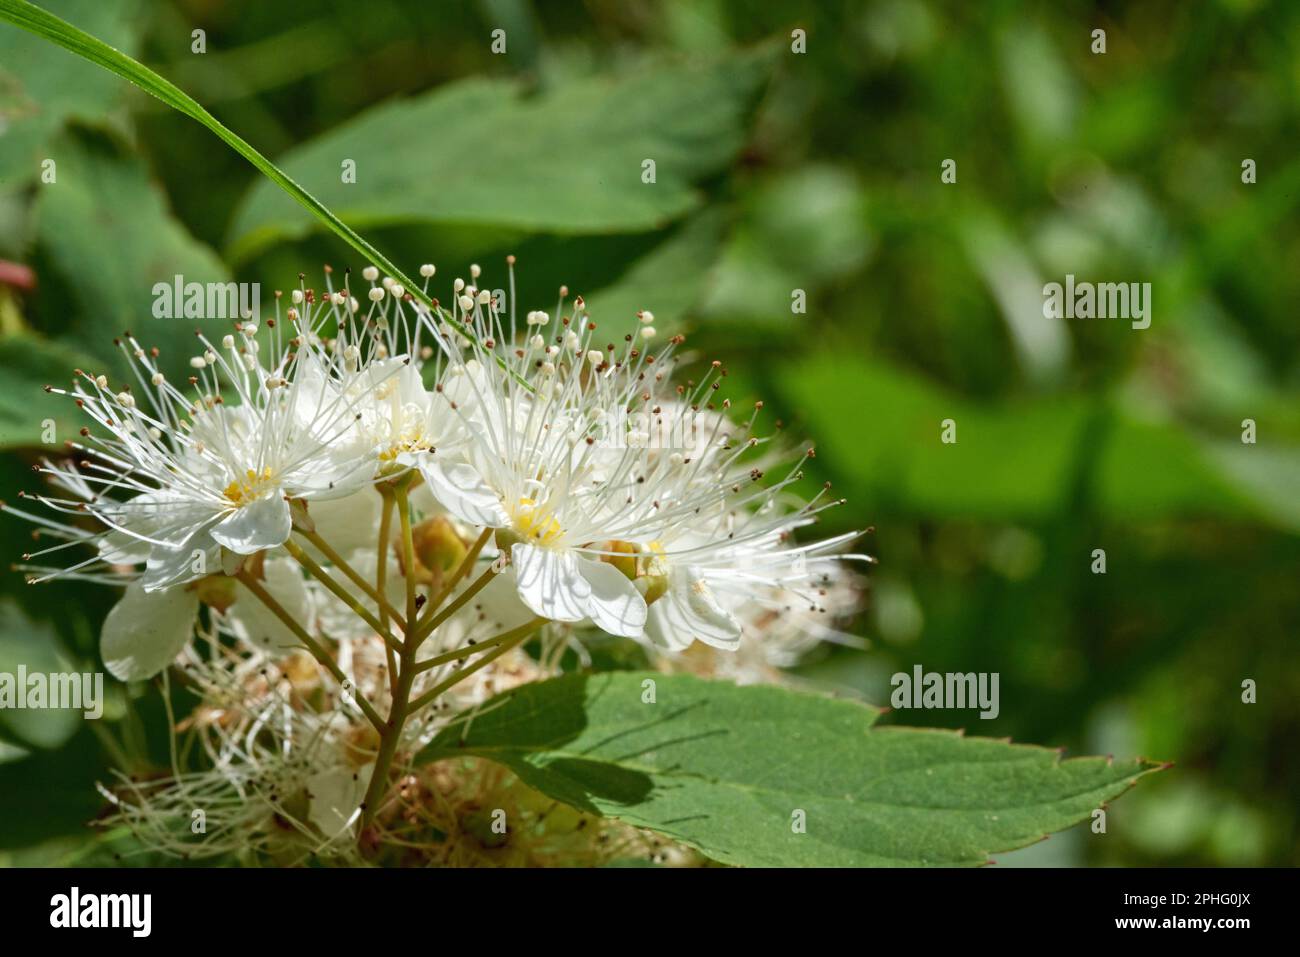 A white germander meadowsweet with its delicate petals, standing against a blurred green background Stock Photo